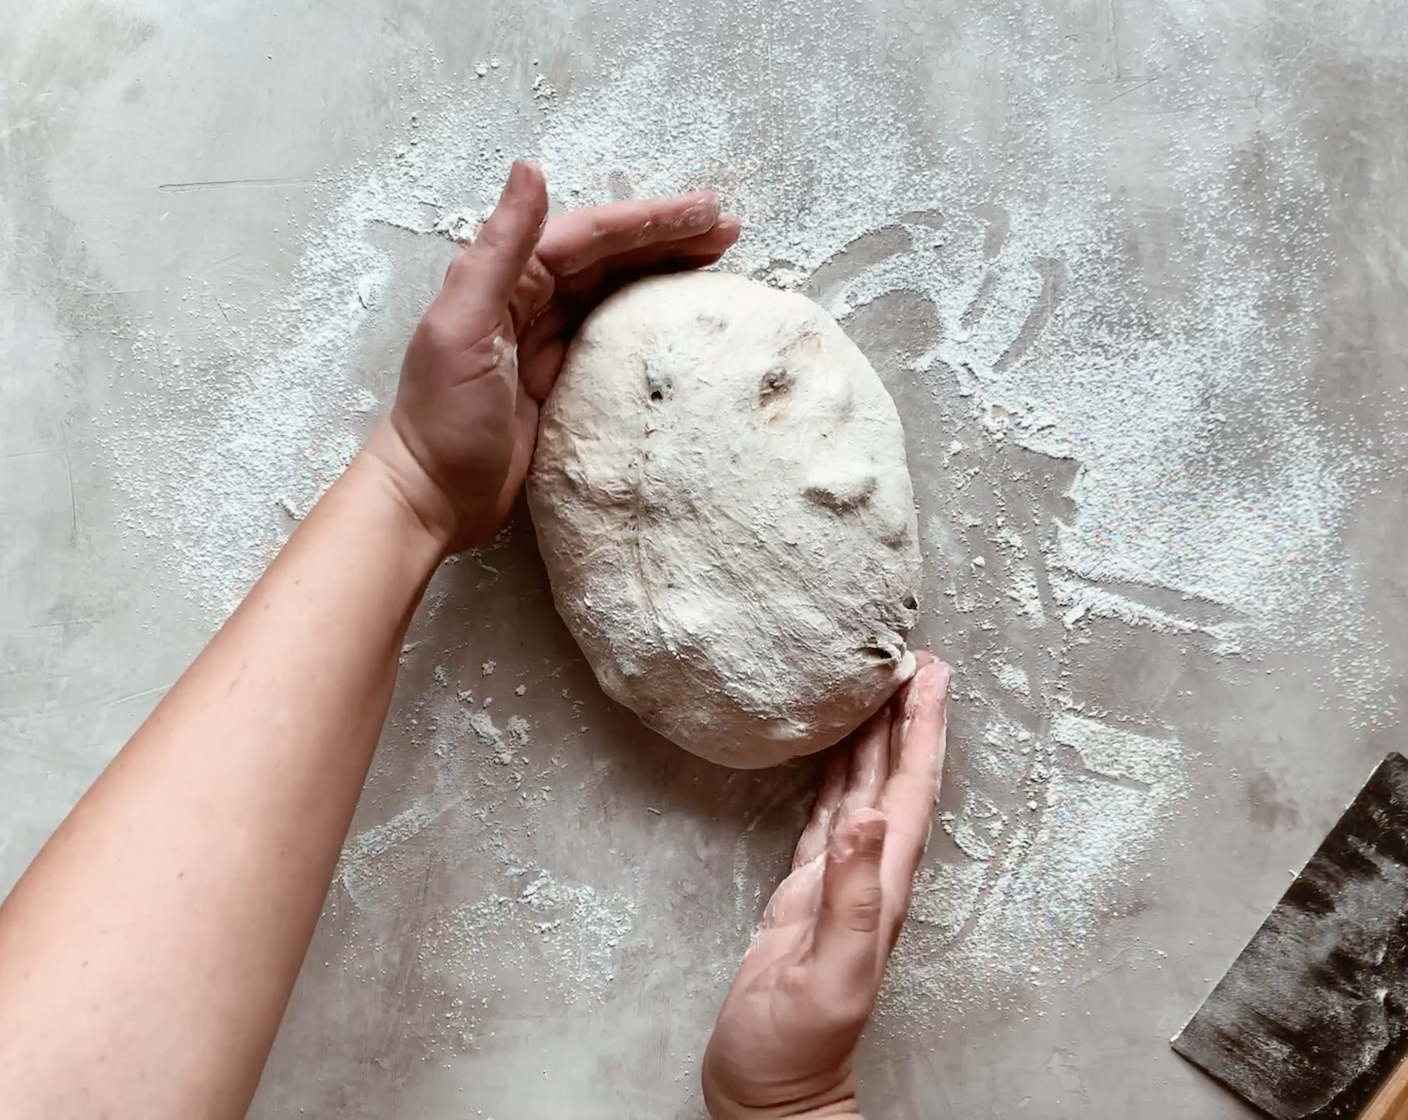 step 9 Flip the dough ball over, so the folds are facing down. Sprinkle the dough with a bit more flour, and gently shape the dough into a ball by rotating and pulling it towards you a few times. Do not knead the dough, just gently coax it until a round shape is formed.